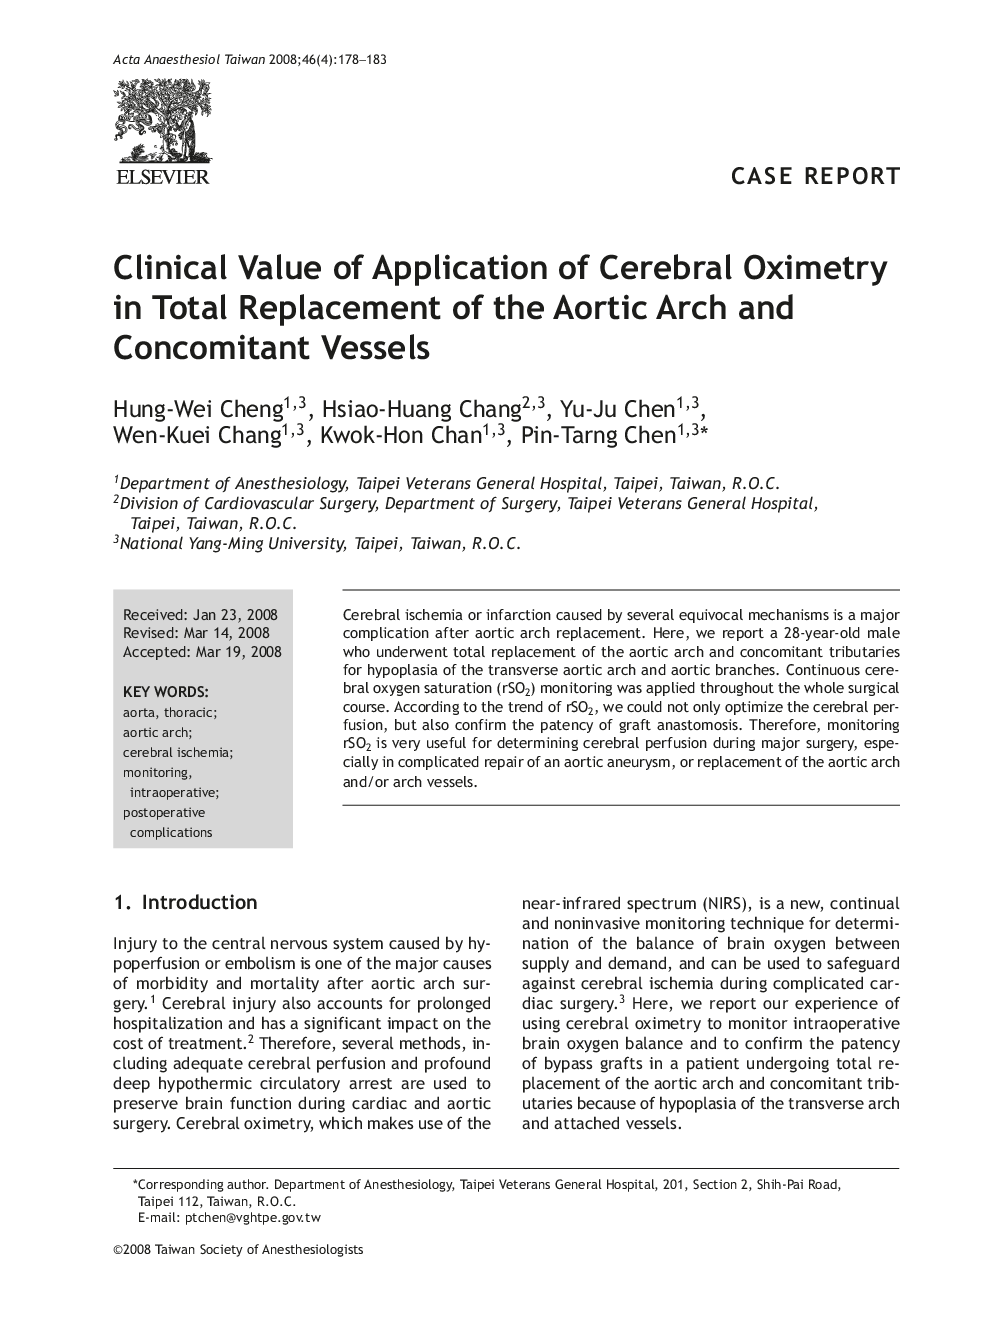 Clinical Value of Application of Cerebral Oximetry in Total Replacement of the Aortic Arch and Concomitant Vessels